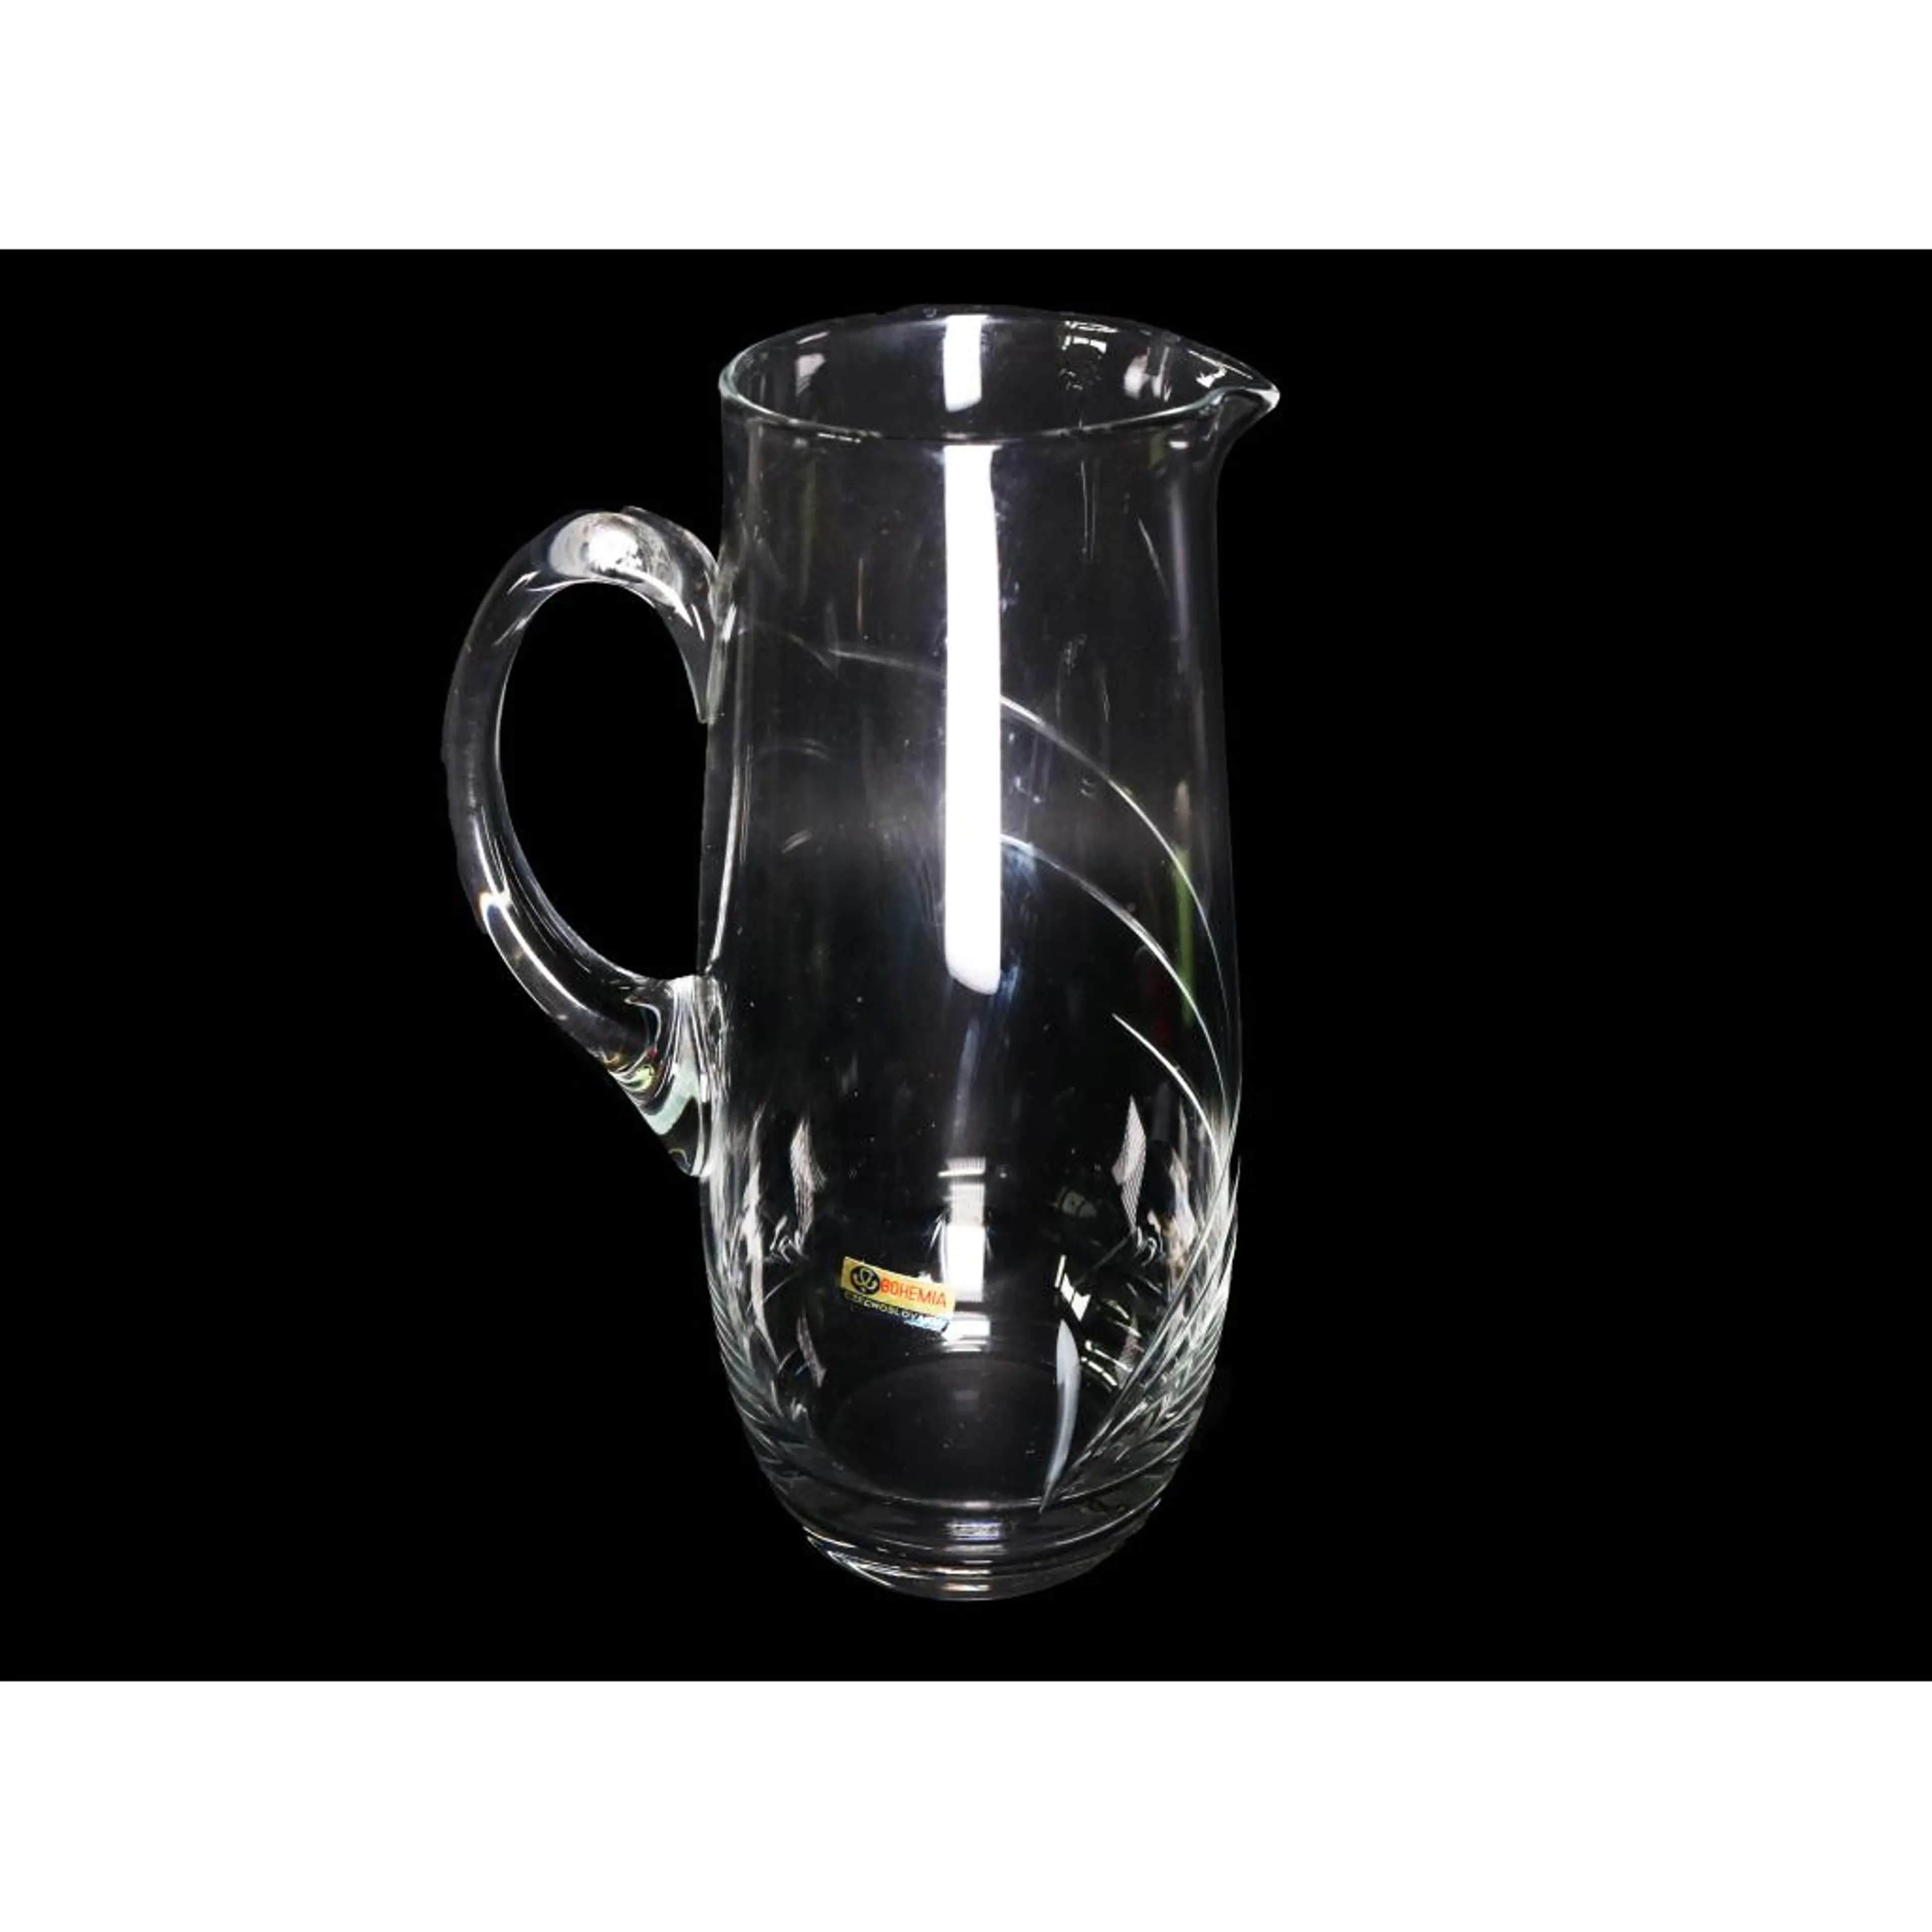 Jug with Handle engraved